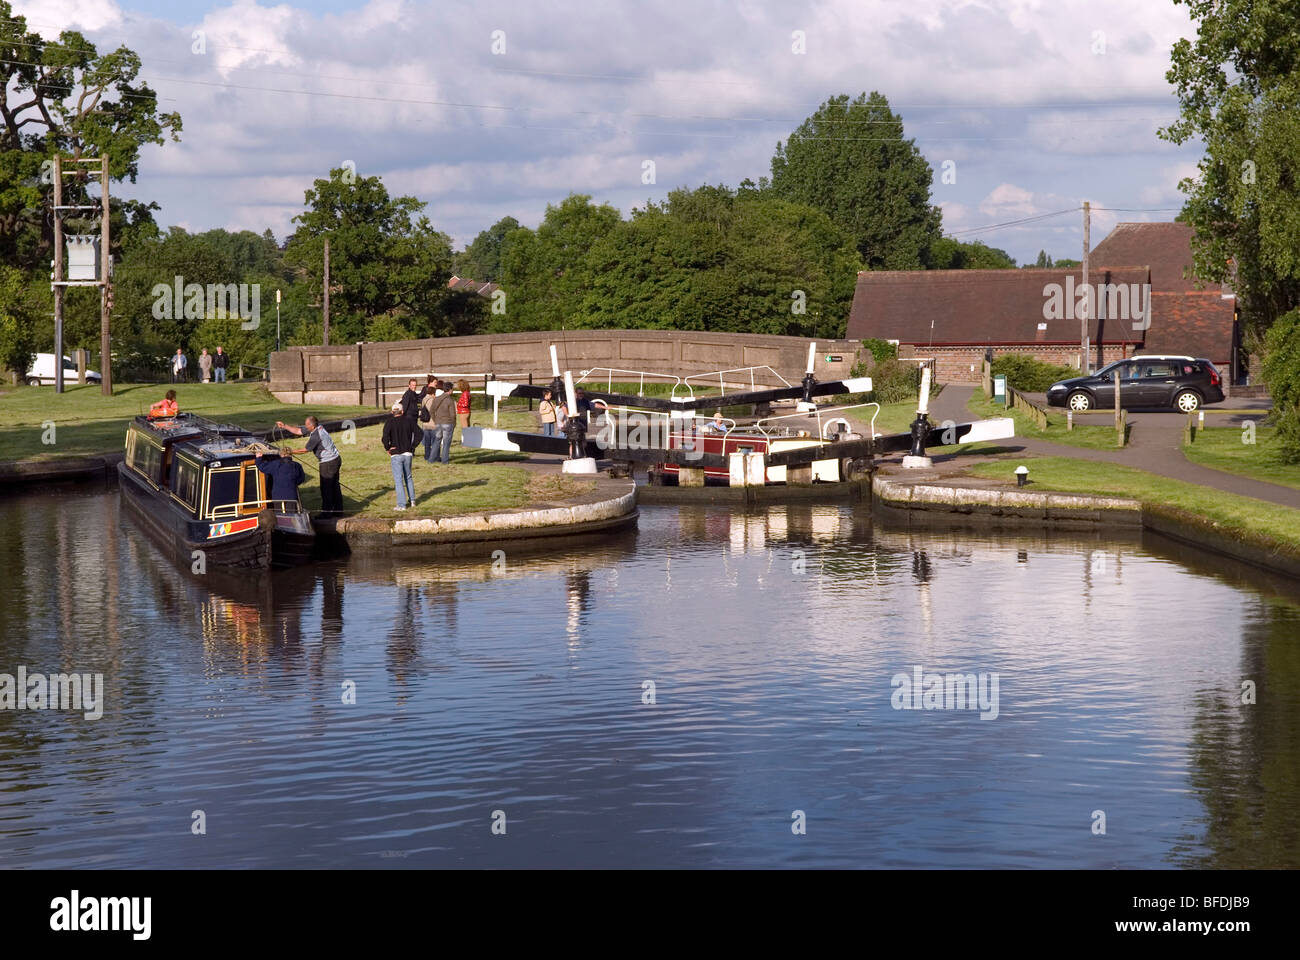 The Hatton Flight of locks is on the Grand Union Canal. There are 21 locks in the space of two miles of waterway. Stock Photo